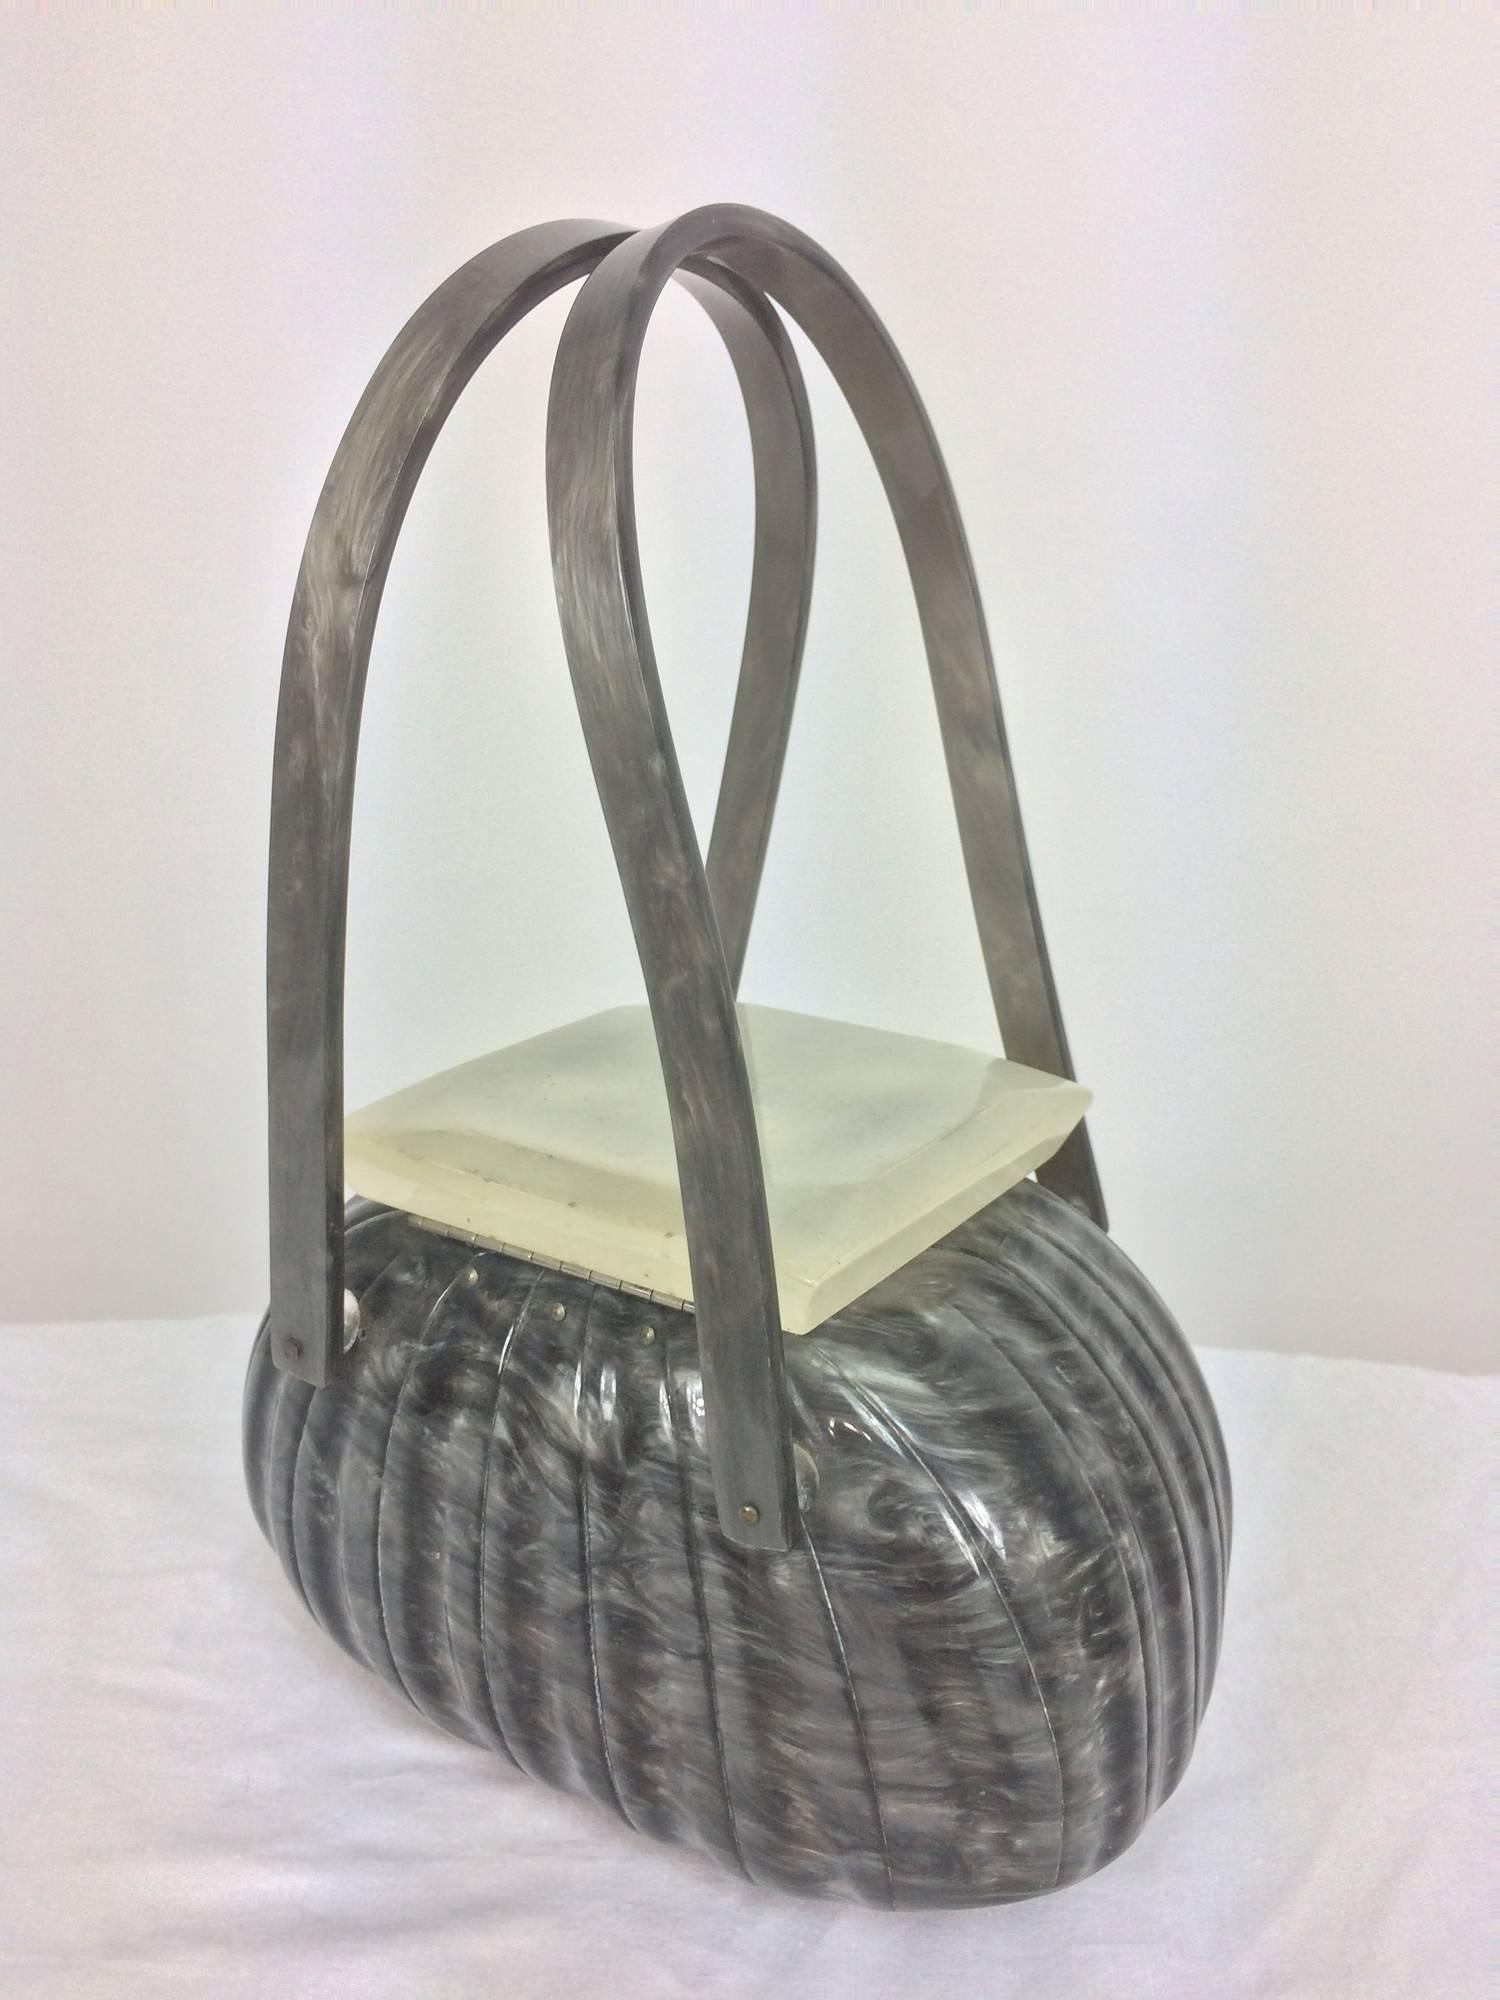 Vintage Llewellyn grey pearlized Lucite double handle handbag 1950s...Oval shape bag with fluted design, double handles...The square lift top is frosted opaque Lucite with a carved design of four leaves...Marked Llewellyn in script on the inside